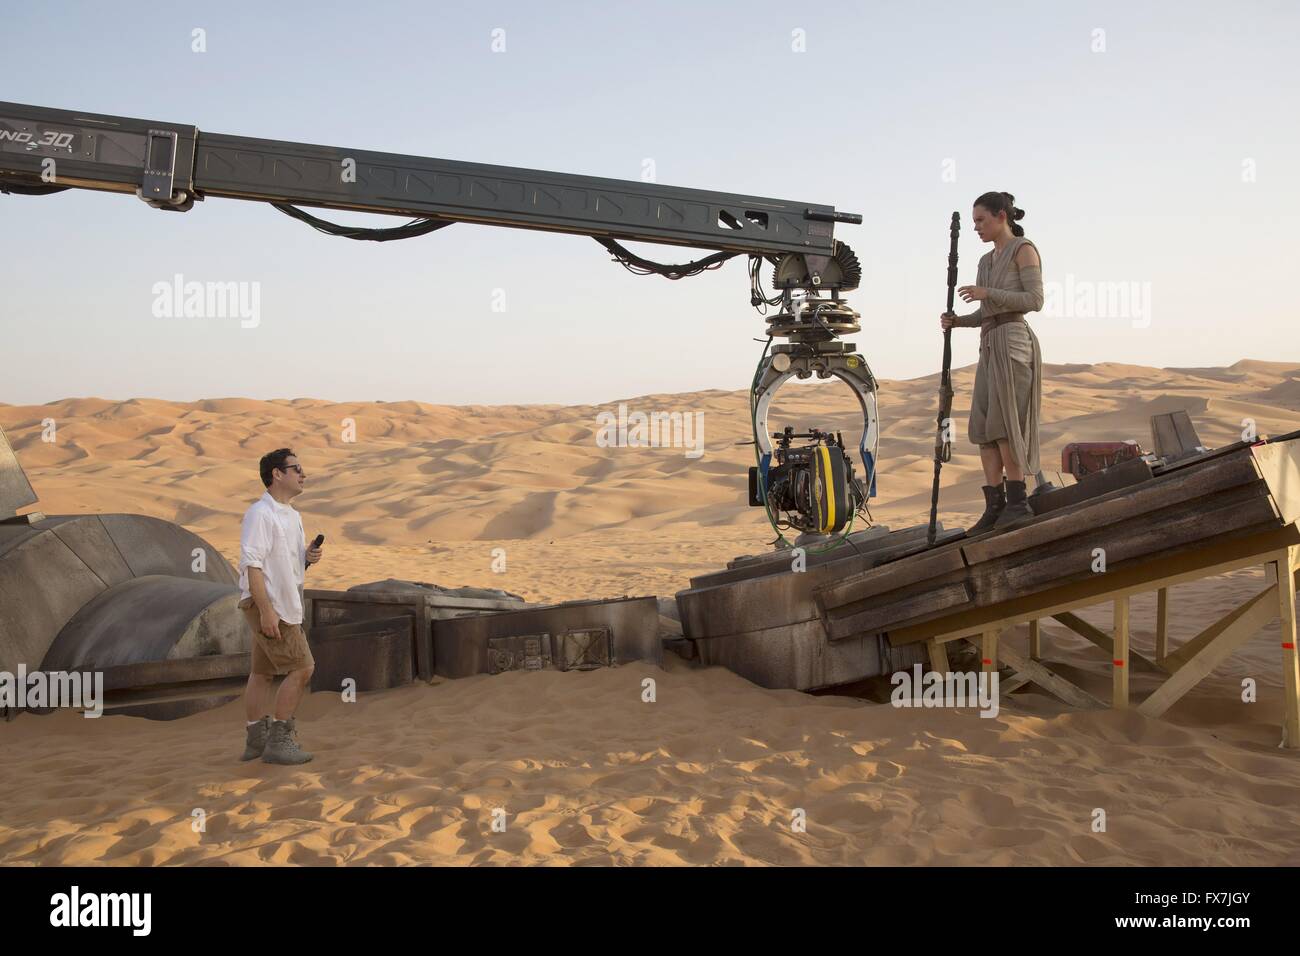 Star Wars: Episode VII - The Force Awakens Year : 2015 USA Director : J.J. Abrams J.J. Abrams, Daisy Ridley Shooting picture Stock Photo